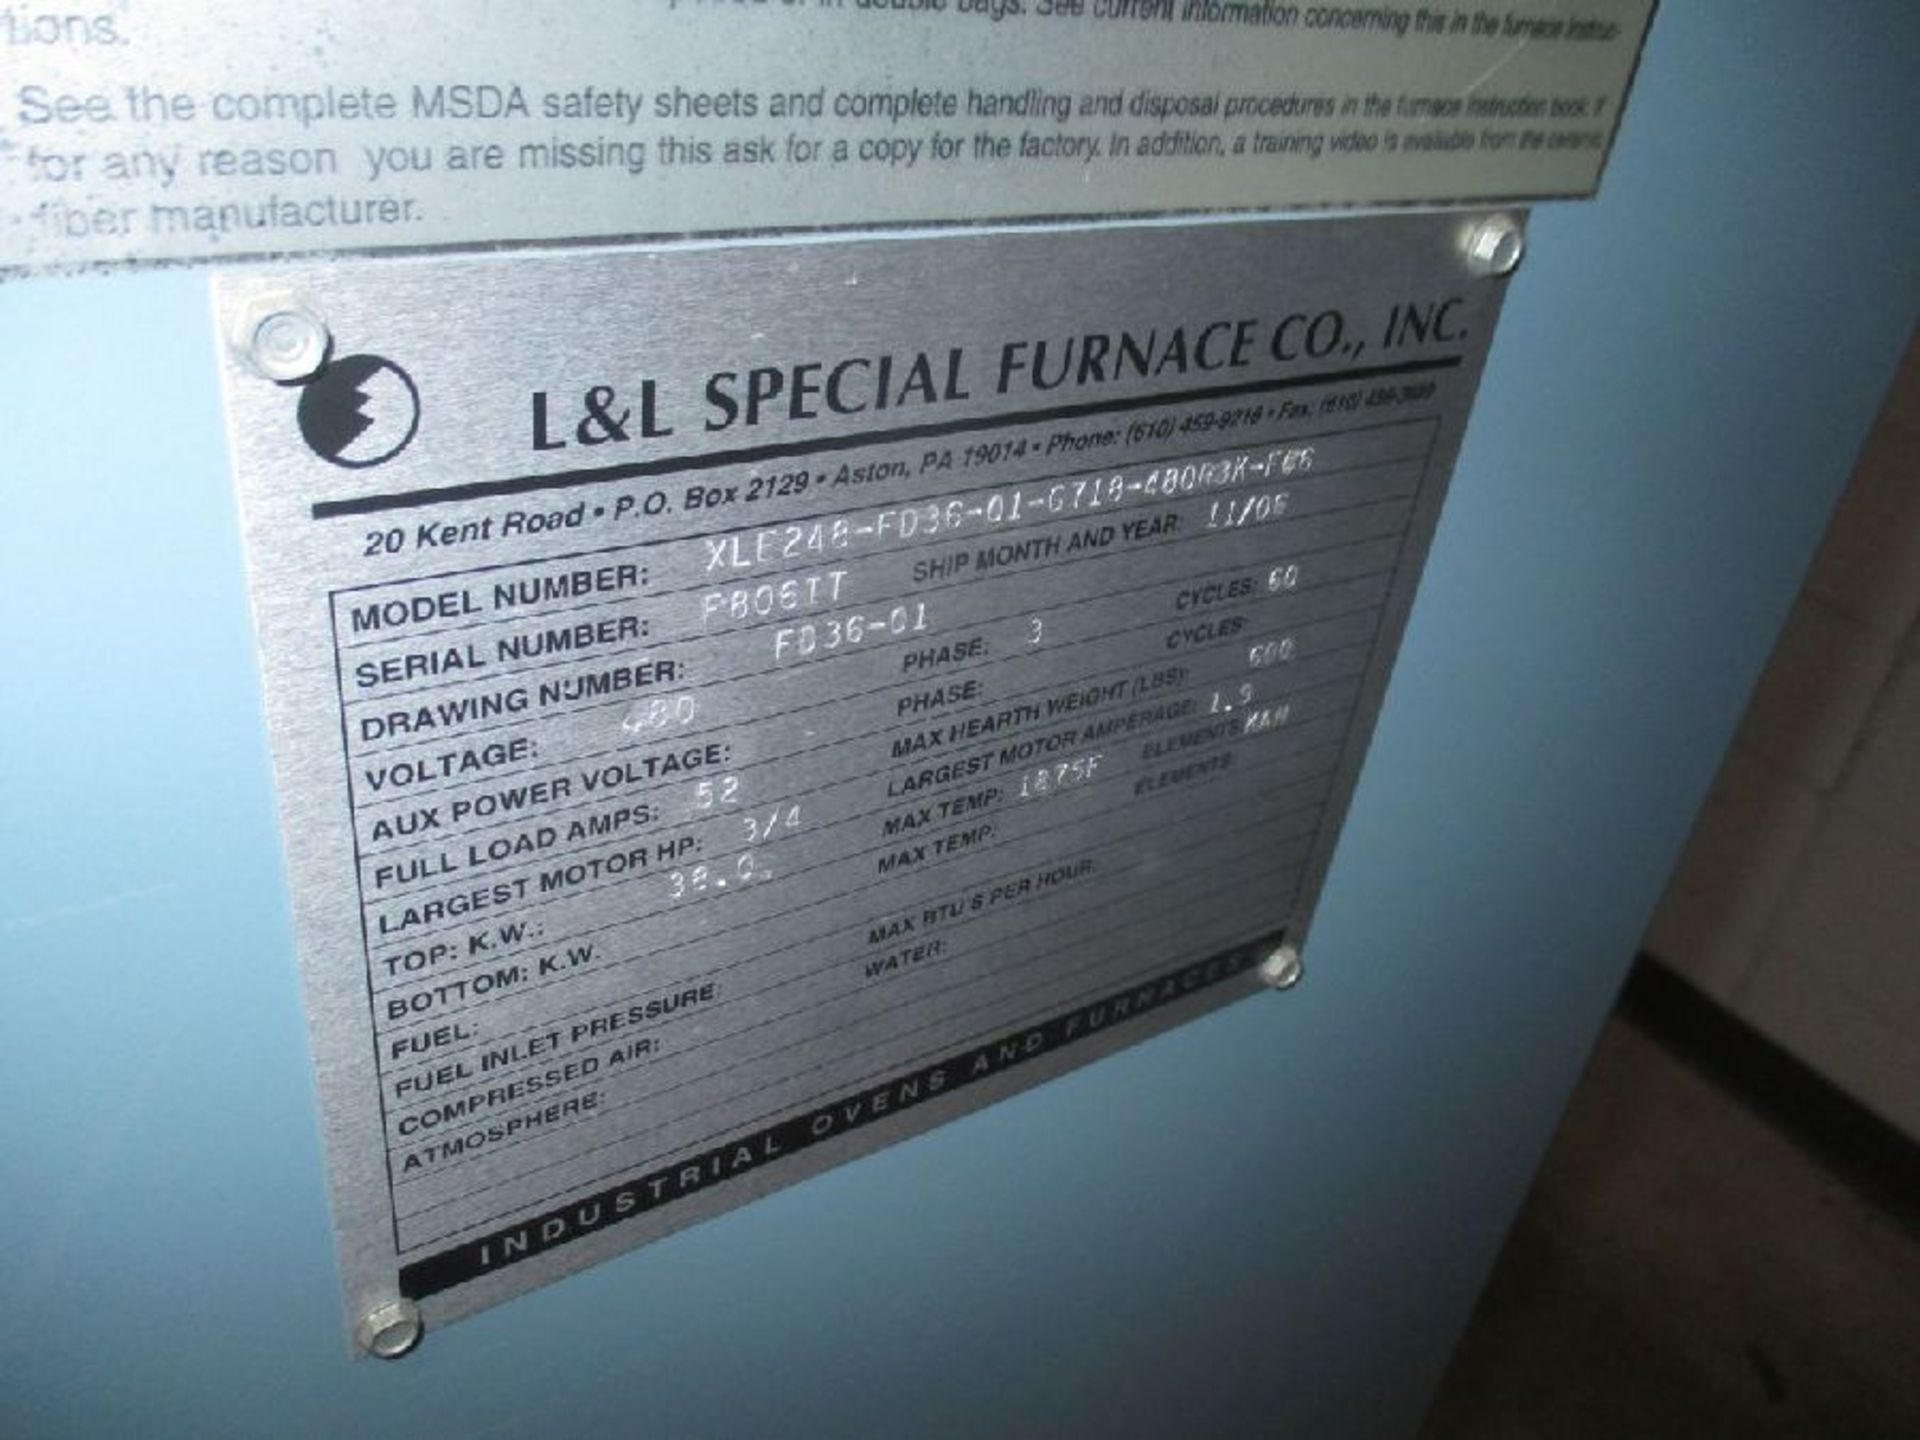 L & L Special Furnace Co. Model XLE248-FD36-01-G718-480R3K-F06 Precision Electric Box Furnace - Image 7 of 12